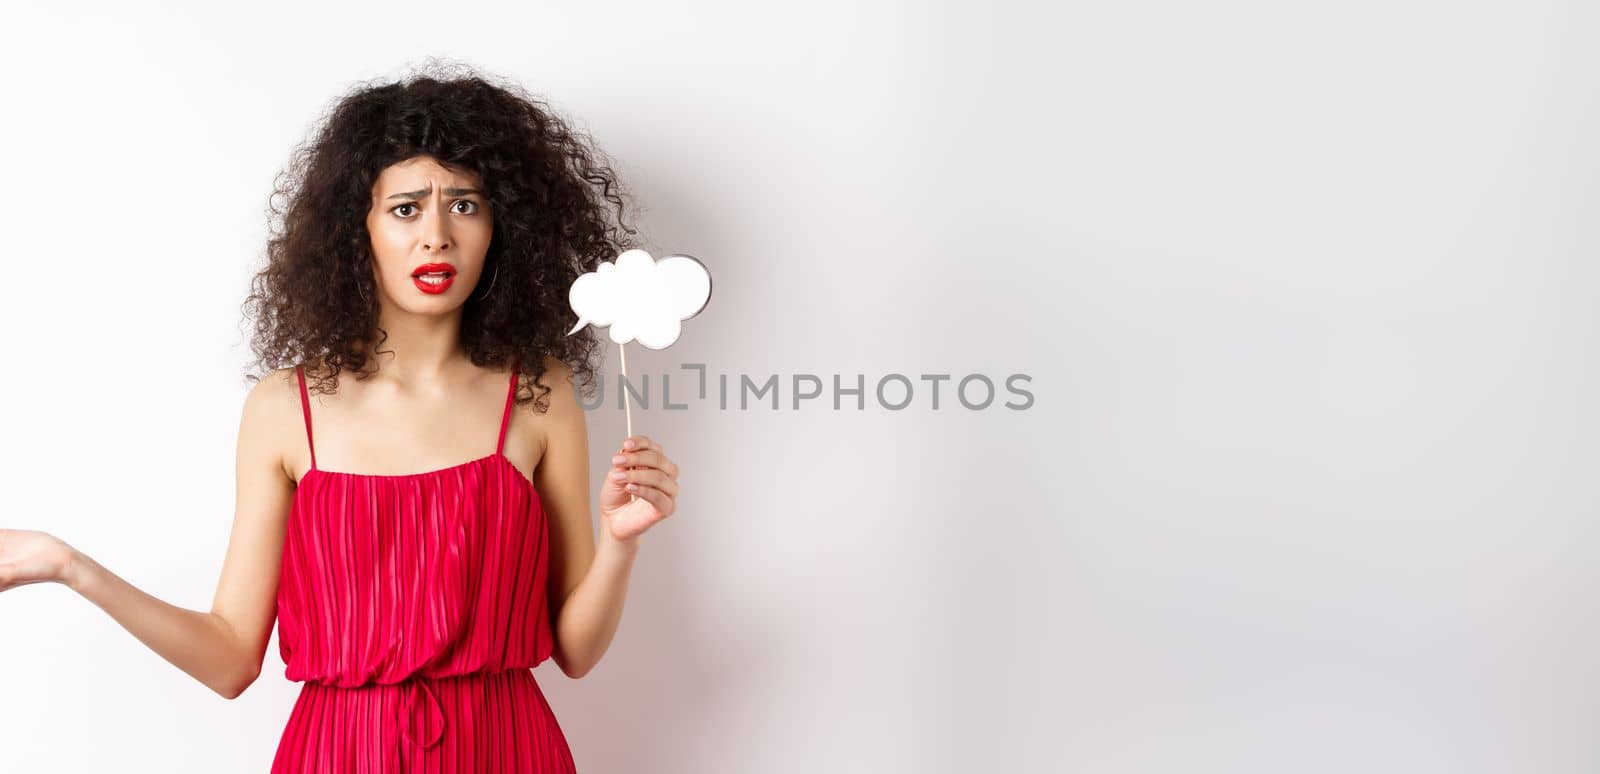 Confused young woman in red dress, frowning and looking upset, holding comment cloud stick, standing against white background by Benzoix